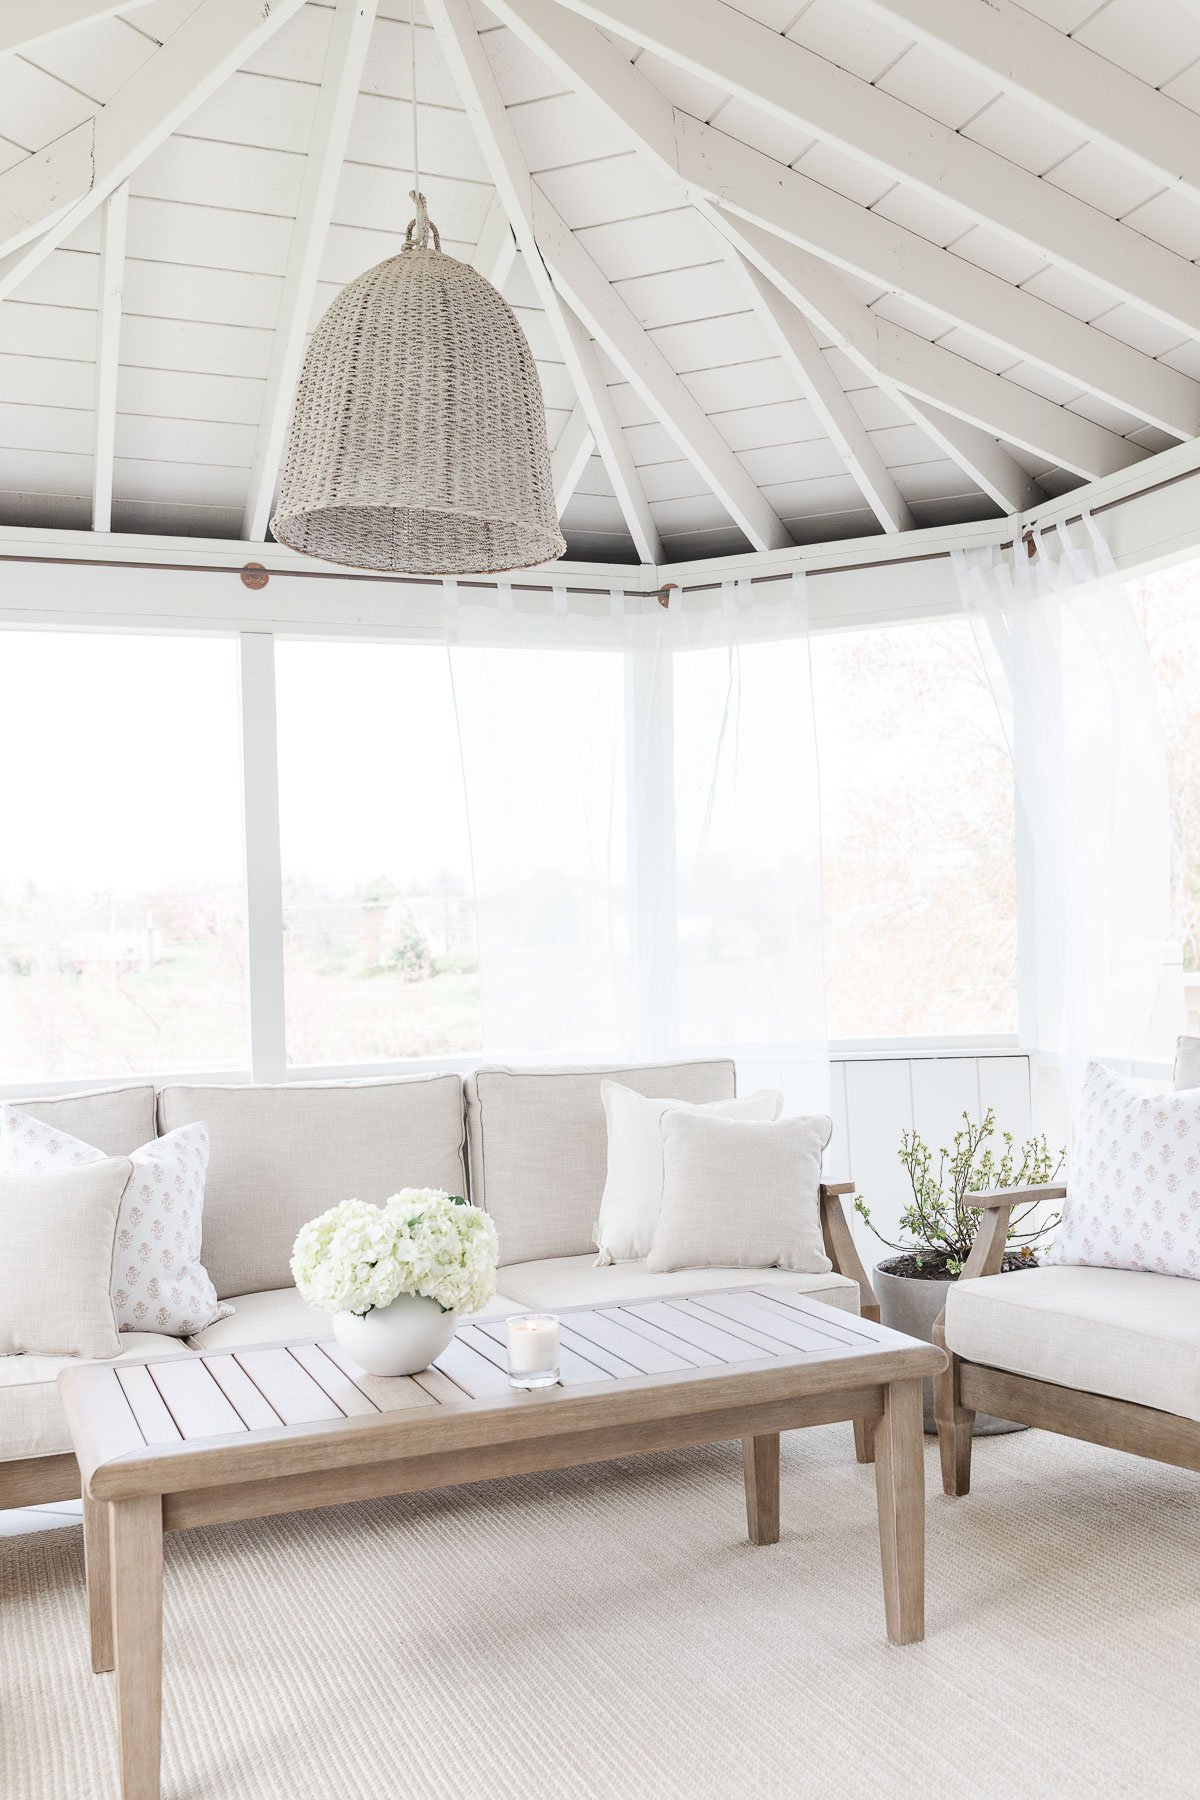 A screened in porch with white furniture and a basket pendant light for added ambiance.